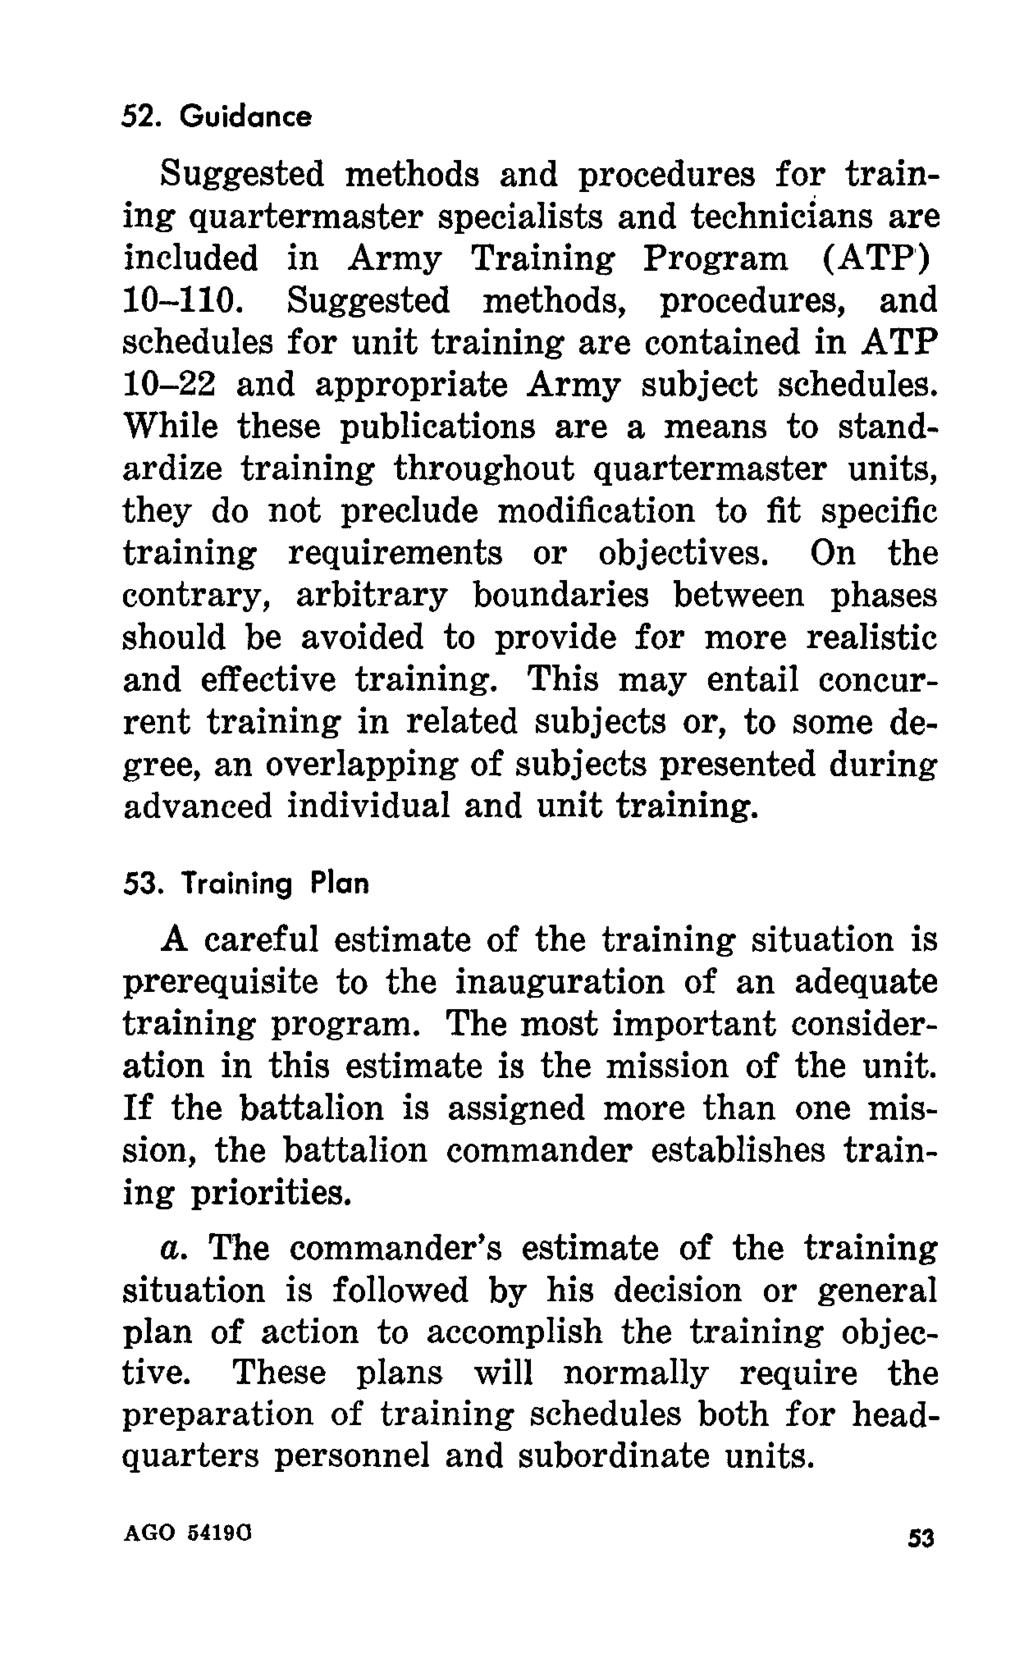 WWW.SURVIVALEBOOKS 52. Guidance Suggested methods and procedures for training quartermaster specialists and technicians are included in Army Training Program (ATP) 10-110.